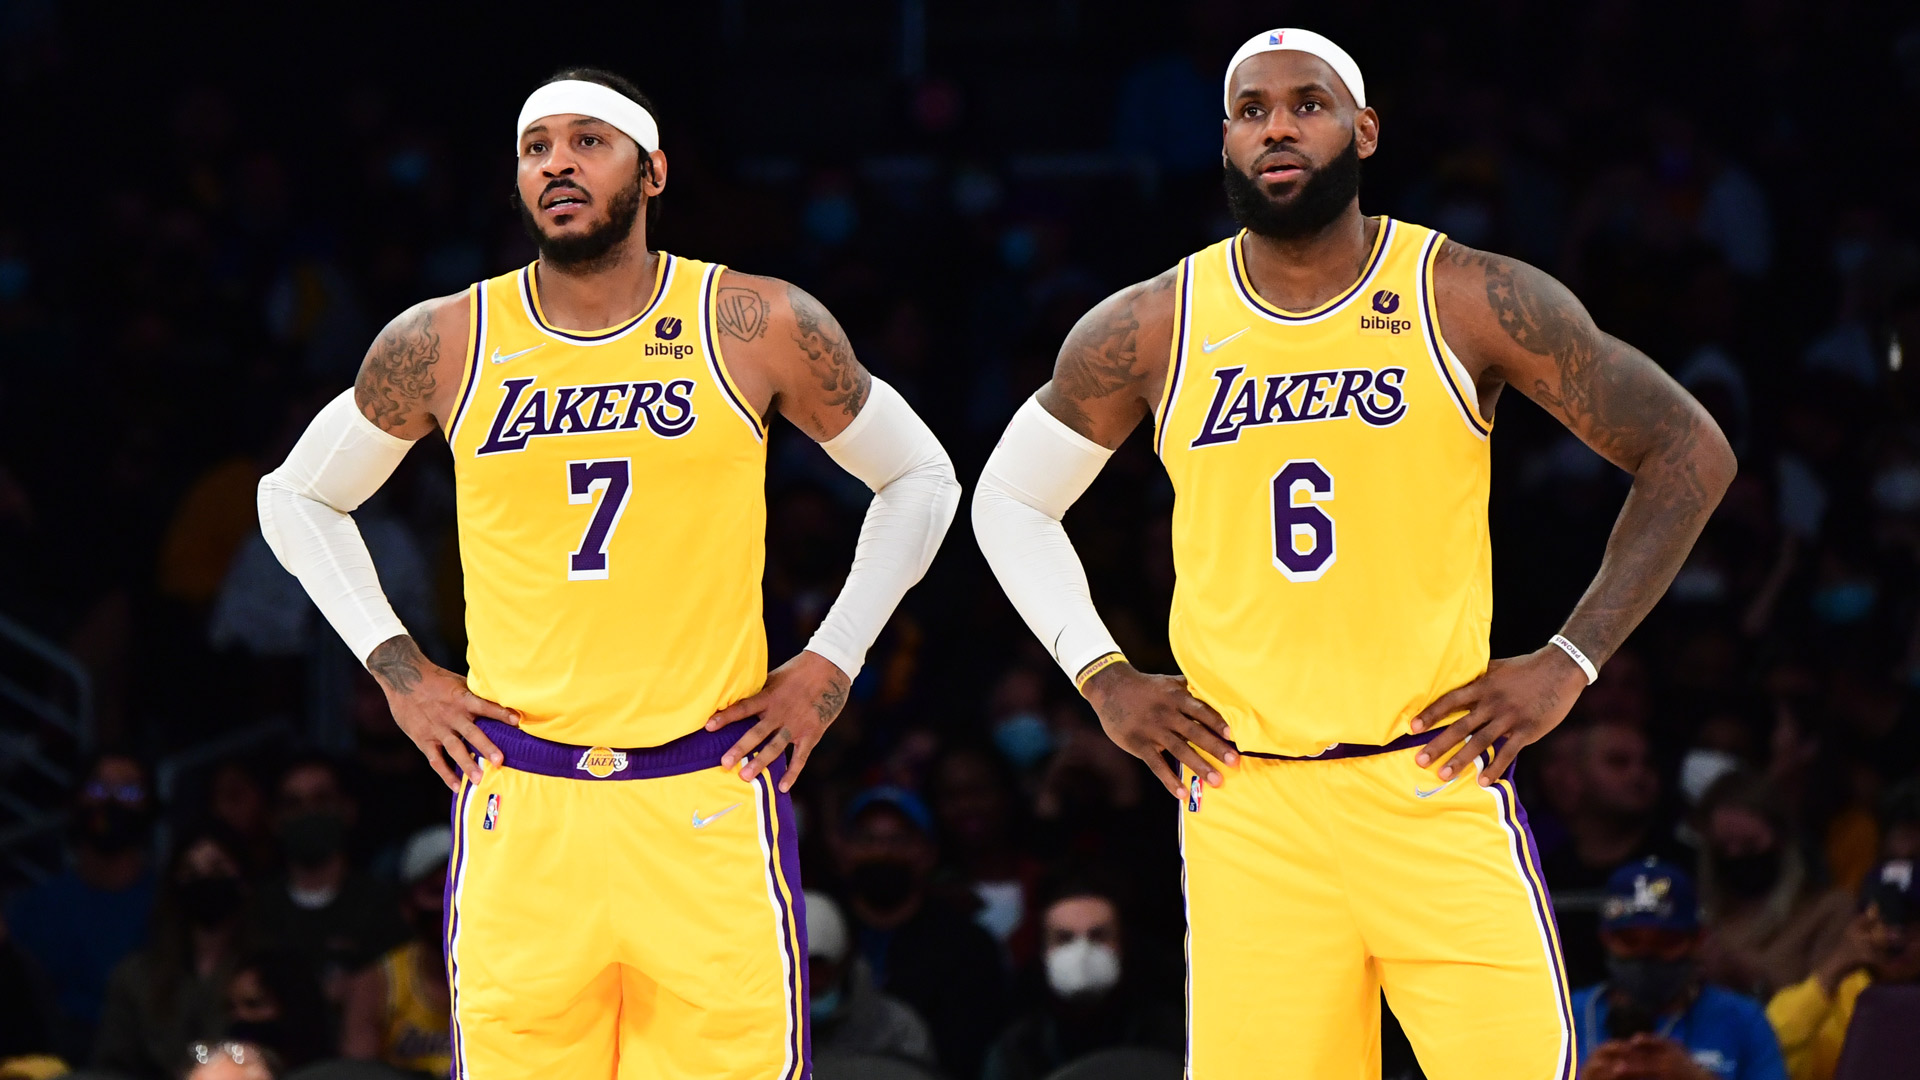 Carmelo Anthony joins LeBron James, Lakers with a title his only goal